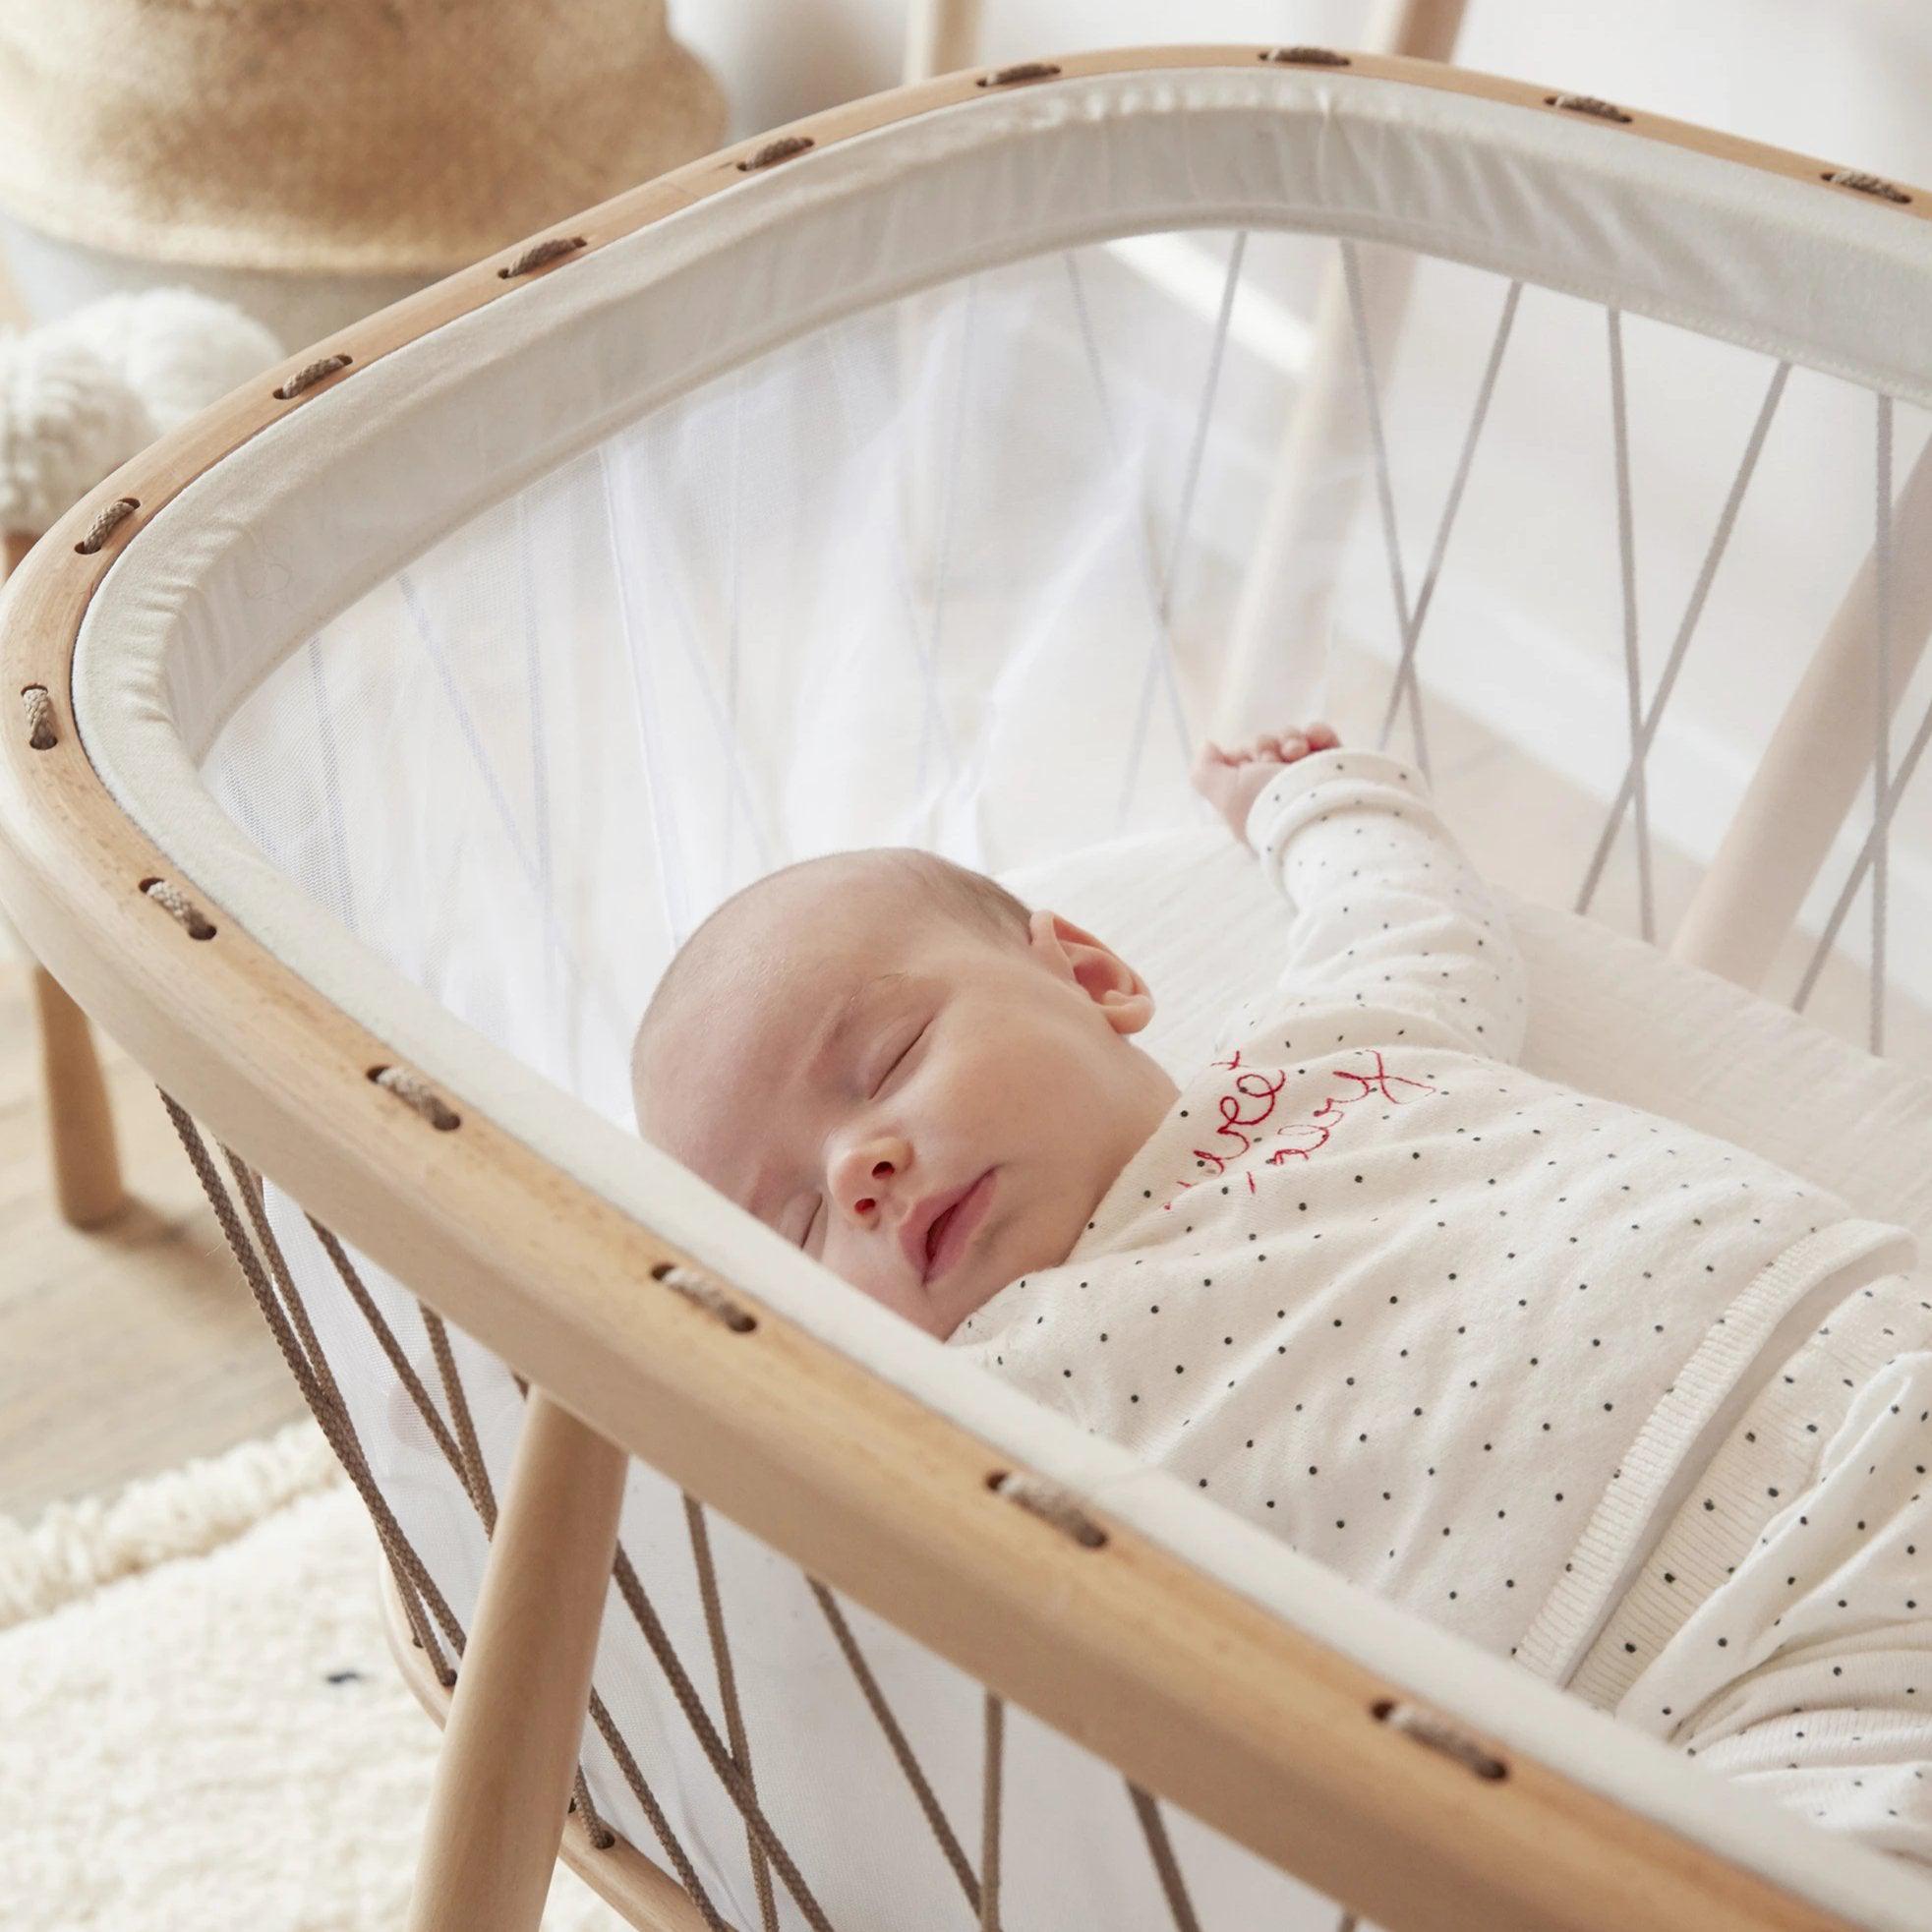 A Charlie Crane KUMI bassinet in Hazelnut with a baby sleeping in it.